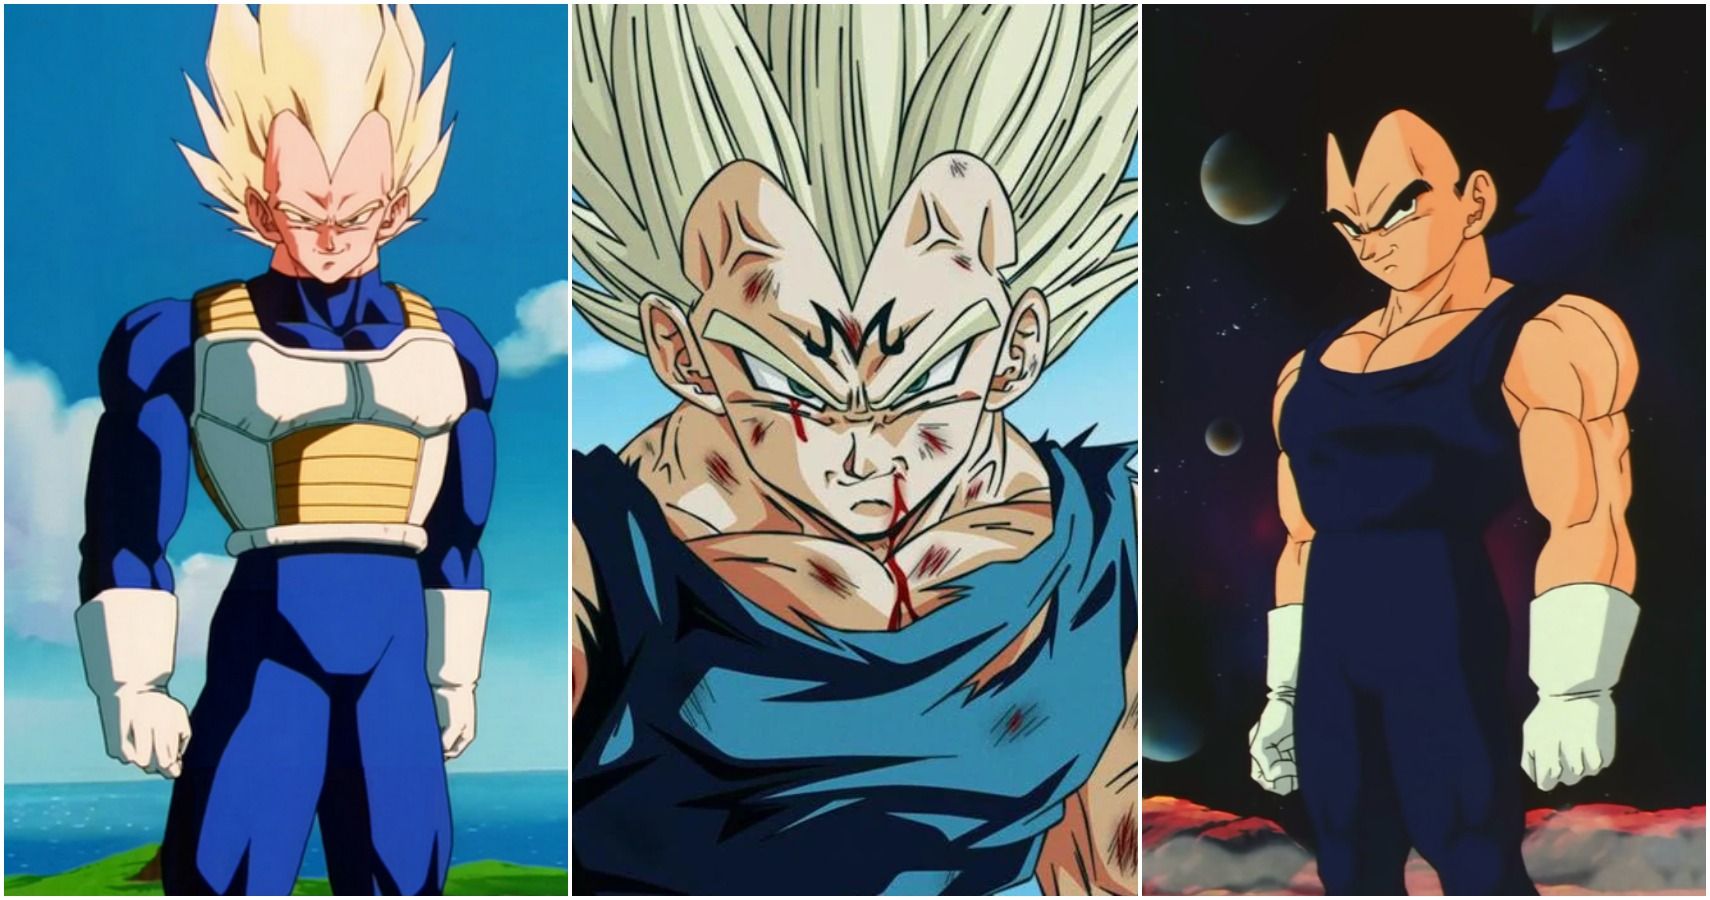 How Well Do You Know Vegeta From The Dragon Ball Z Series?